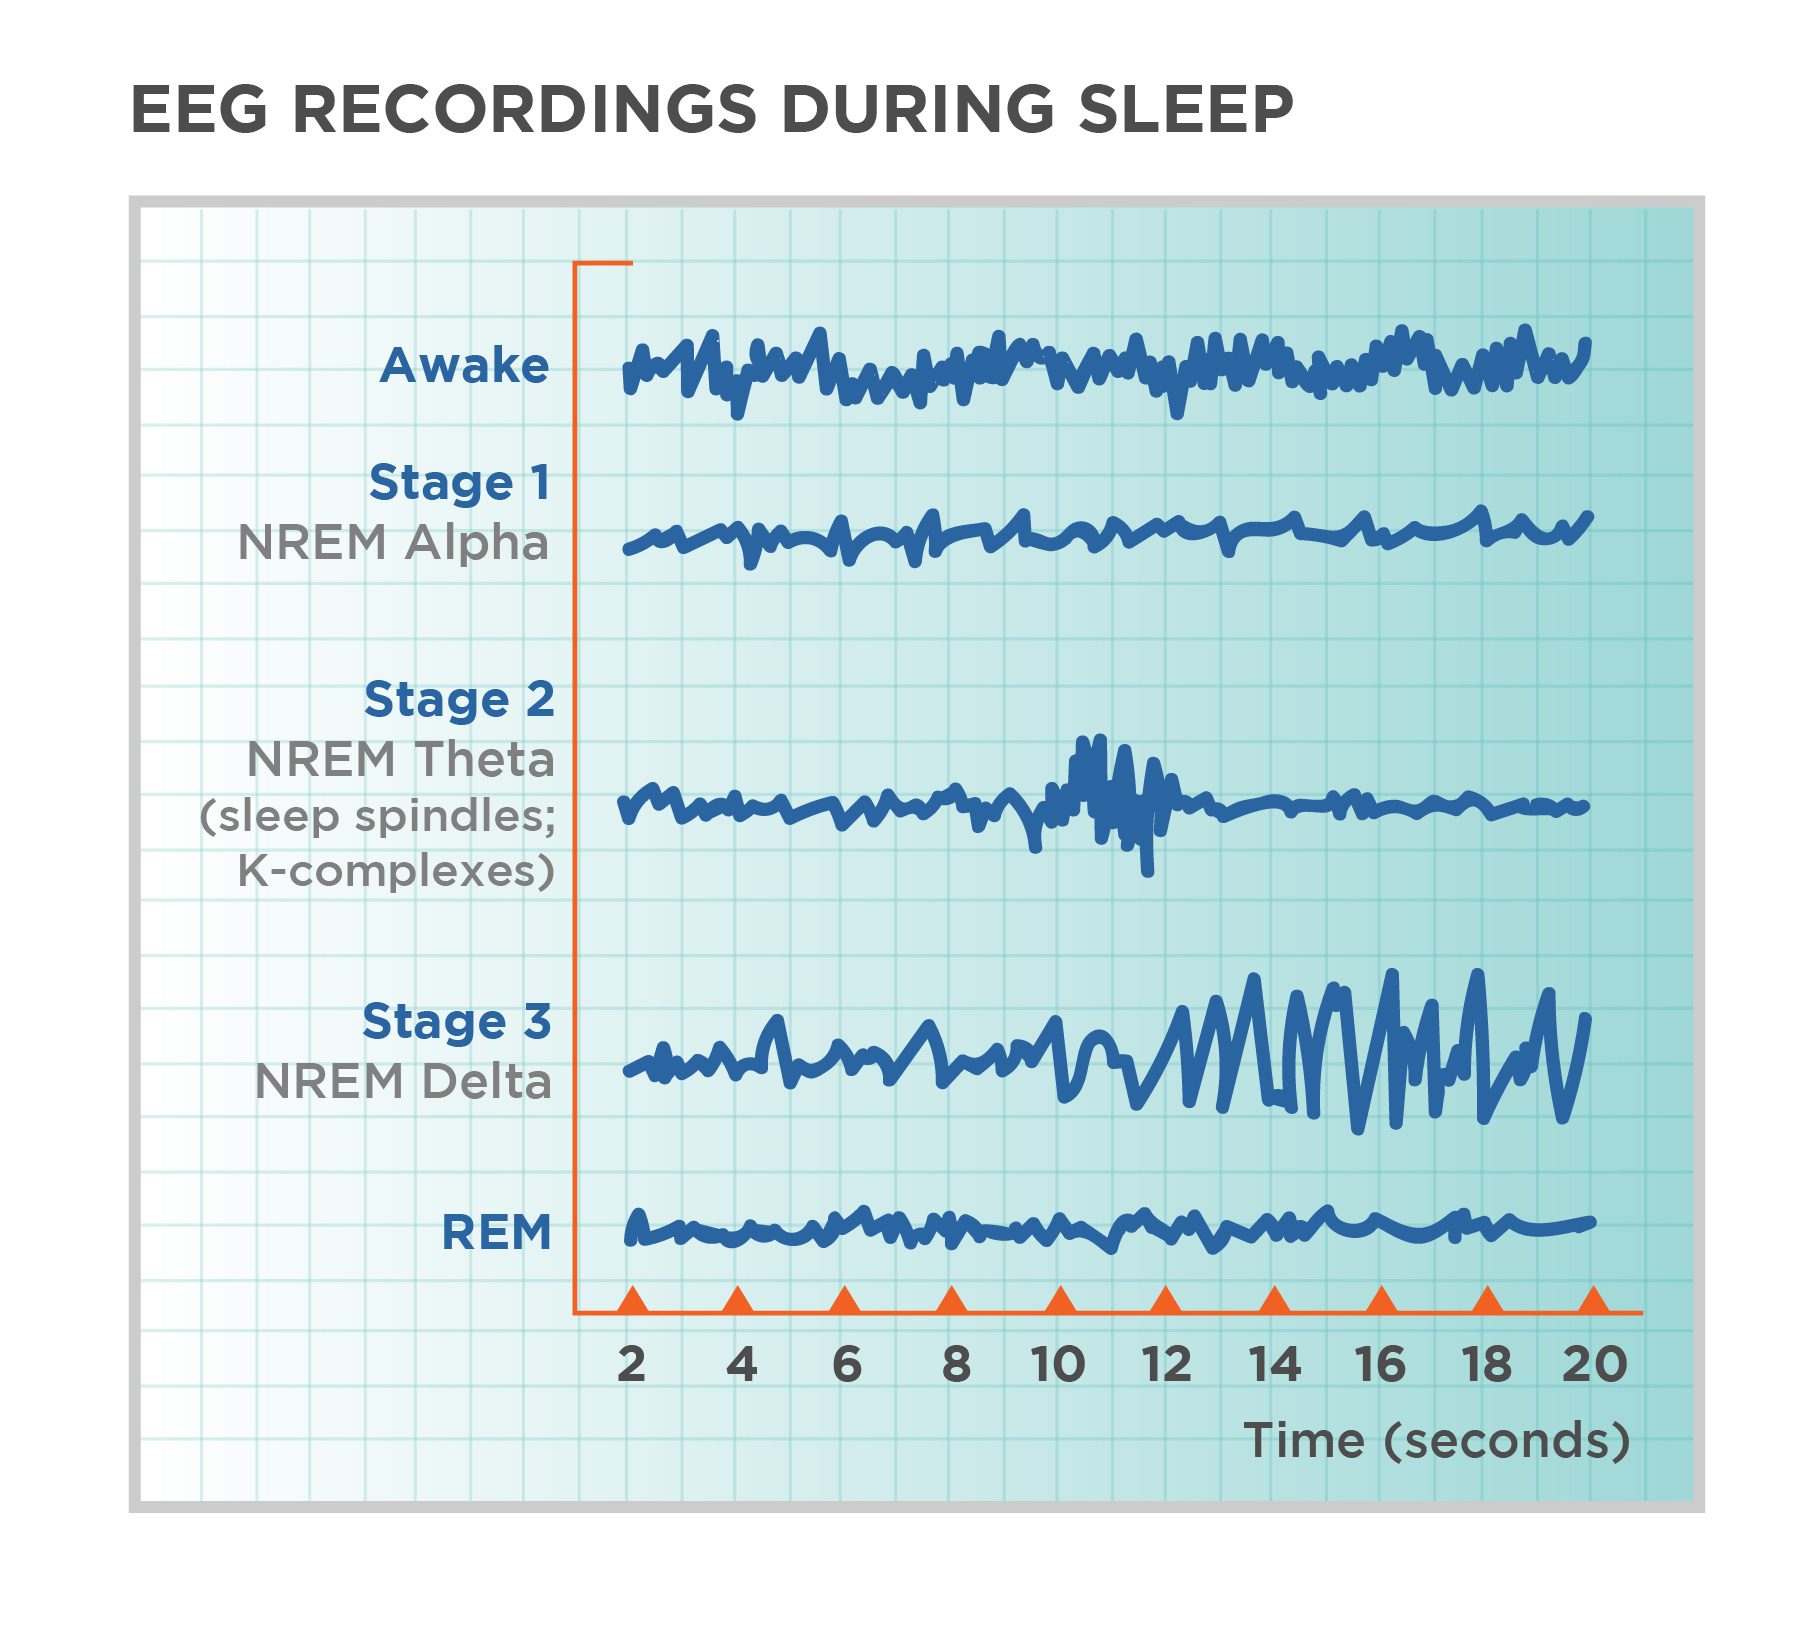 EEG Recordings During Sleep showing shape of brain waves at four different stages of sleep and, for comparison, brain waves while awake. Each sleep stage has associated wavelengths of varying amplitude and frequency. Relative to the others, “awake” has a very close wavelength and a medium amplitude. Stage 1 (NREM Alpha) is characterized by a generally uniform wavelength and a relatively low amplitude which doubles and quickly reverts to normal every 2 seconds. Stage 2 (NREM Theta (sleep spindles; k-complexes)) is comprised of a similar wavelength as stage 1 but lower amplitude. It introduces the K-complex from seconds 10 through 12 which is a short burst of doubled or tripled amplitude and decreased wavelength. Stage 3 (NREM Delta) shows a more uniform wave with gradually increasing amplitude. Finally, REM sleep looks much like stage 2 without the K-complex.